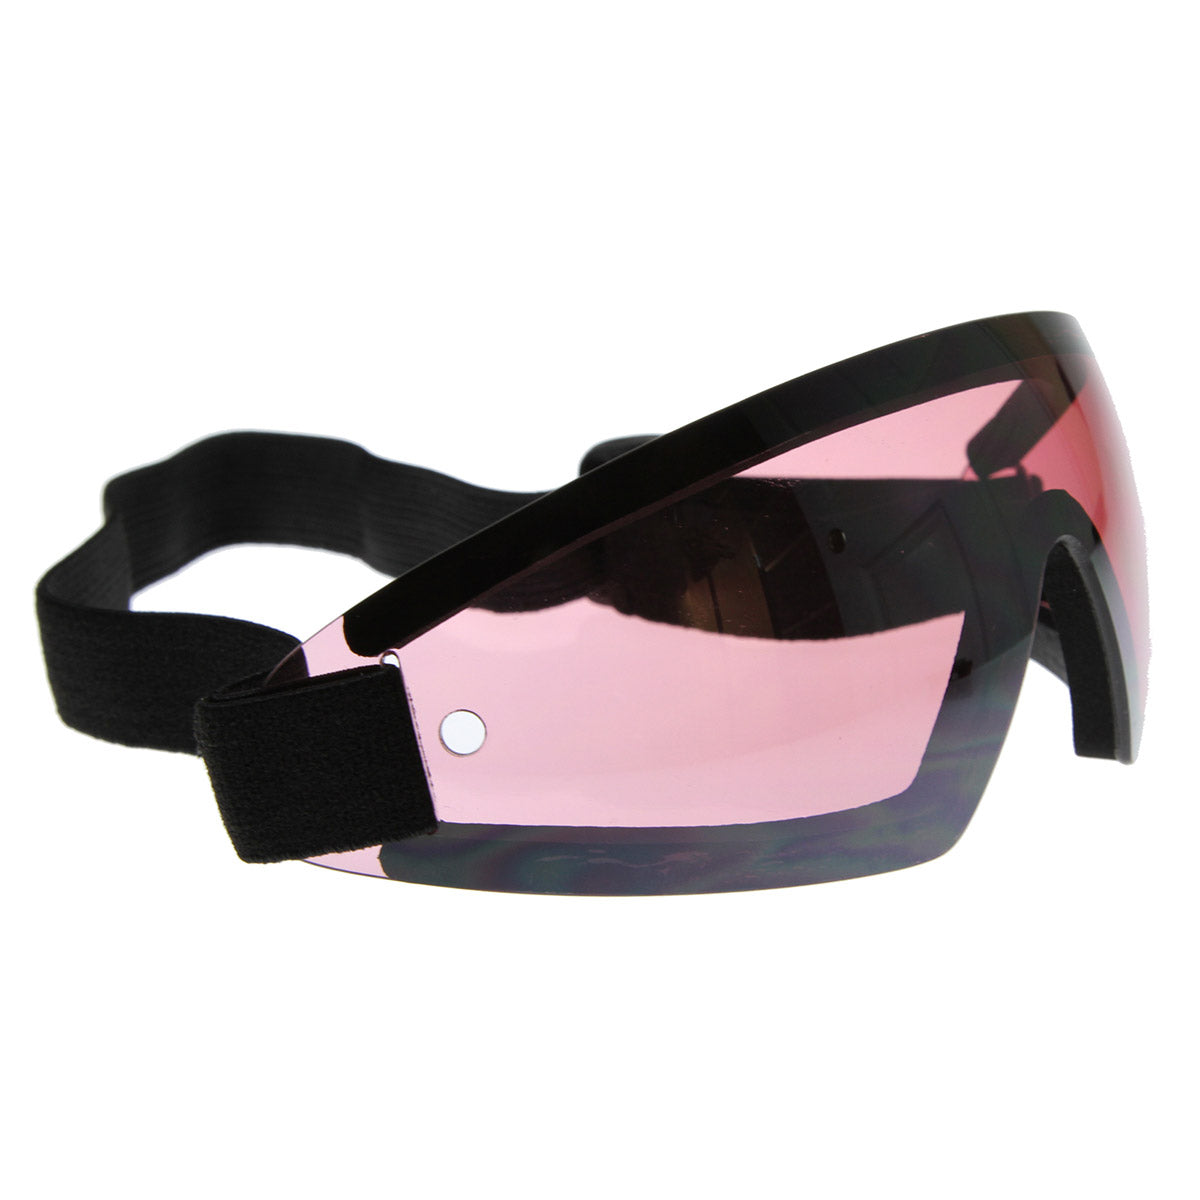  3 Pair Motorcycle Riding Glasses Padding Goggles UV Protection  Dustproof WindproofMotorcycle Sunglasses with Pink Lens for Outdoor sports  Actives : Automotive